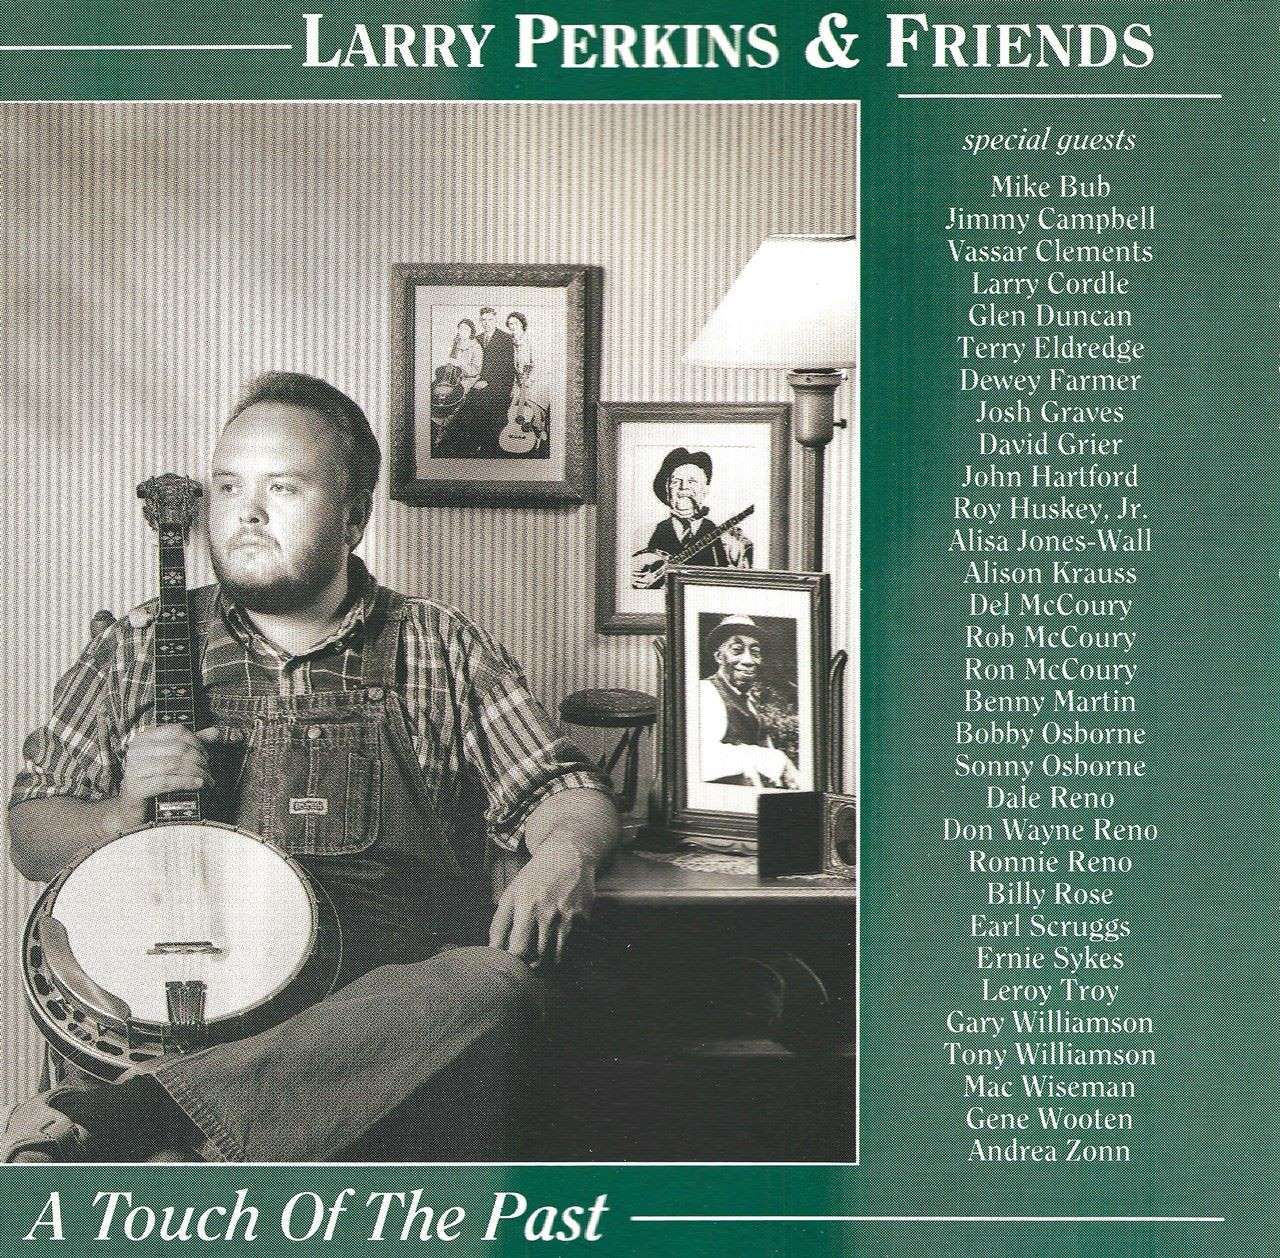 Larry Perkins & Friends – A Touch Of The Past cover album